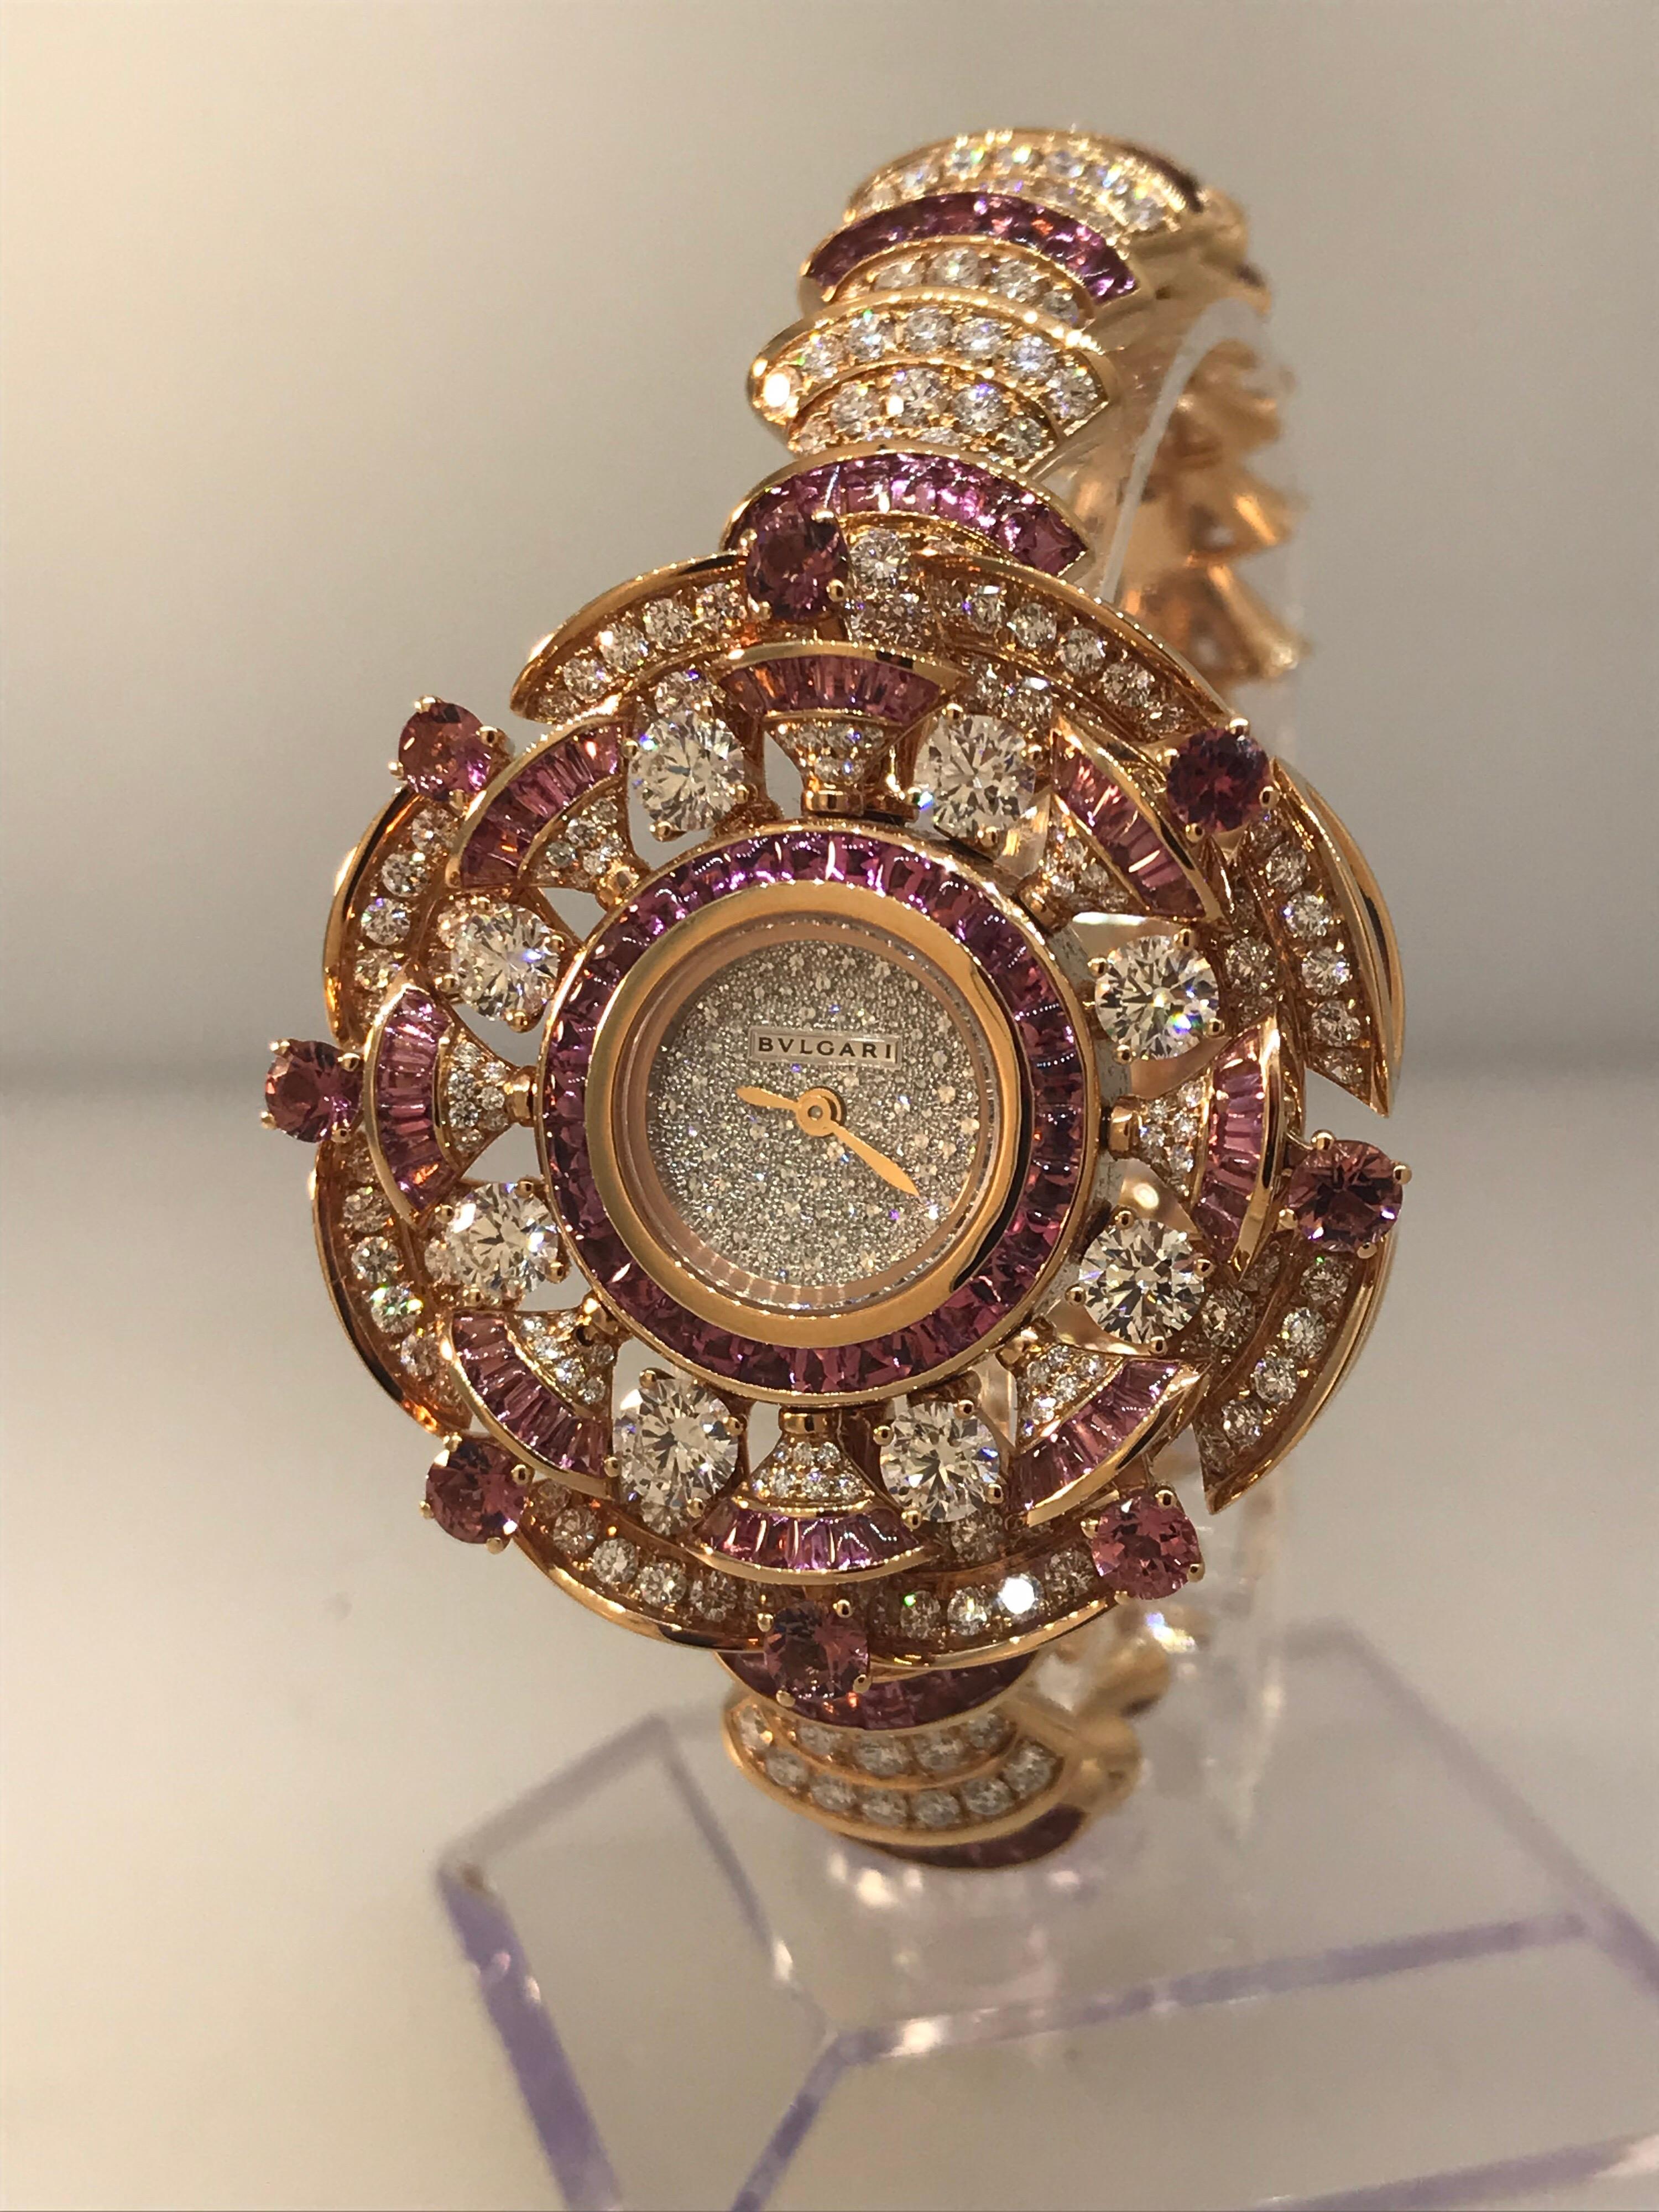 Bulgari Diva's Dream Ladies Watch

Model Number: 102562

100% Authentic

Brand New

Comes with original Bulgari box and papers

18 Karat Rose Gold Case & Bracelet

Case and bracelet set with diamonds and rubellites

Pave diamond dial set with 116